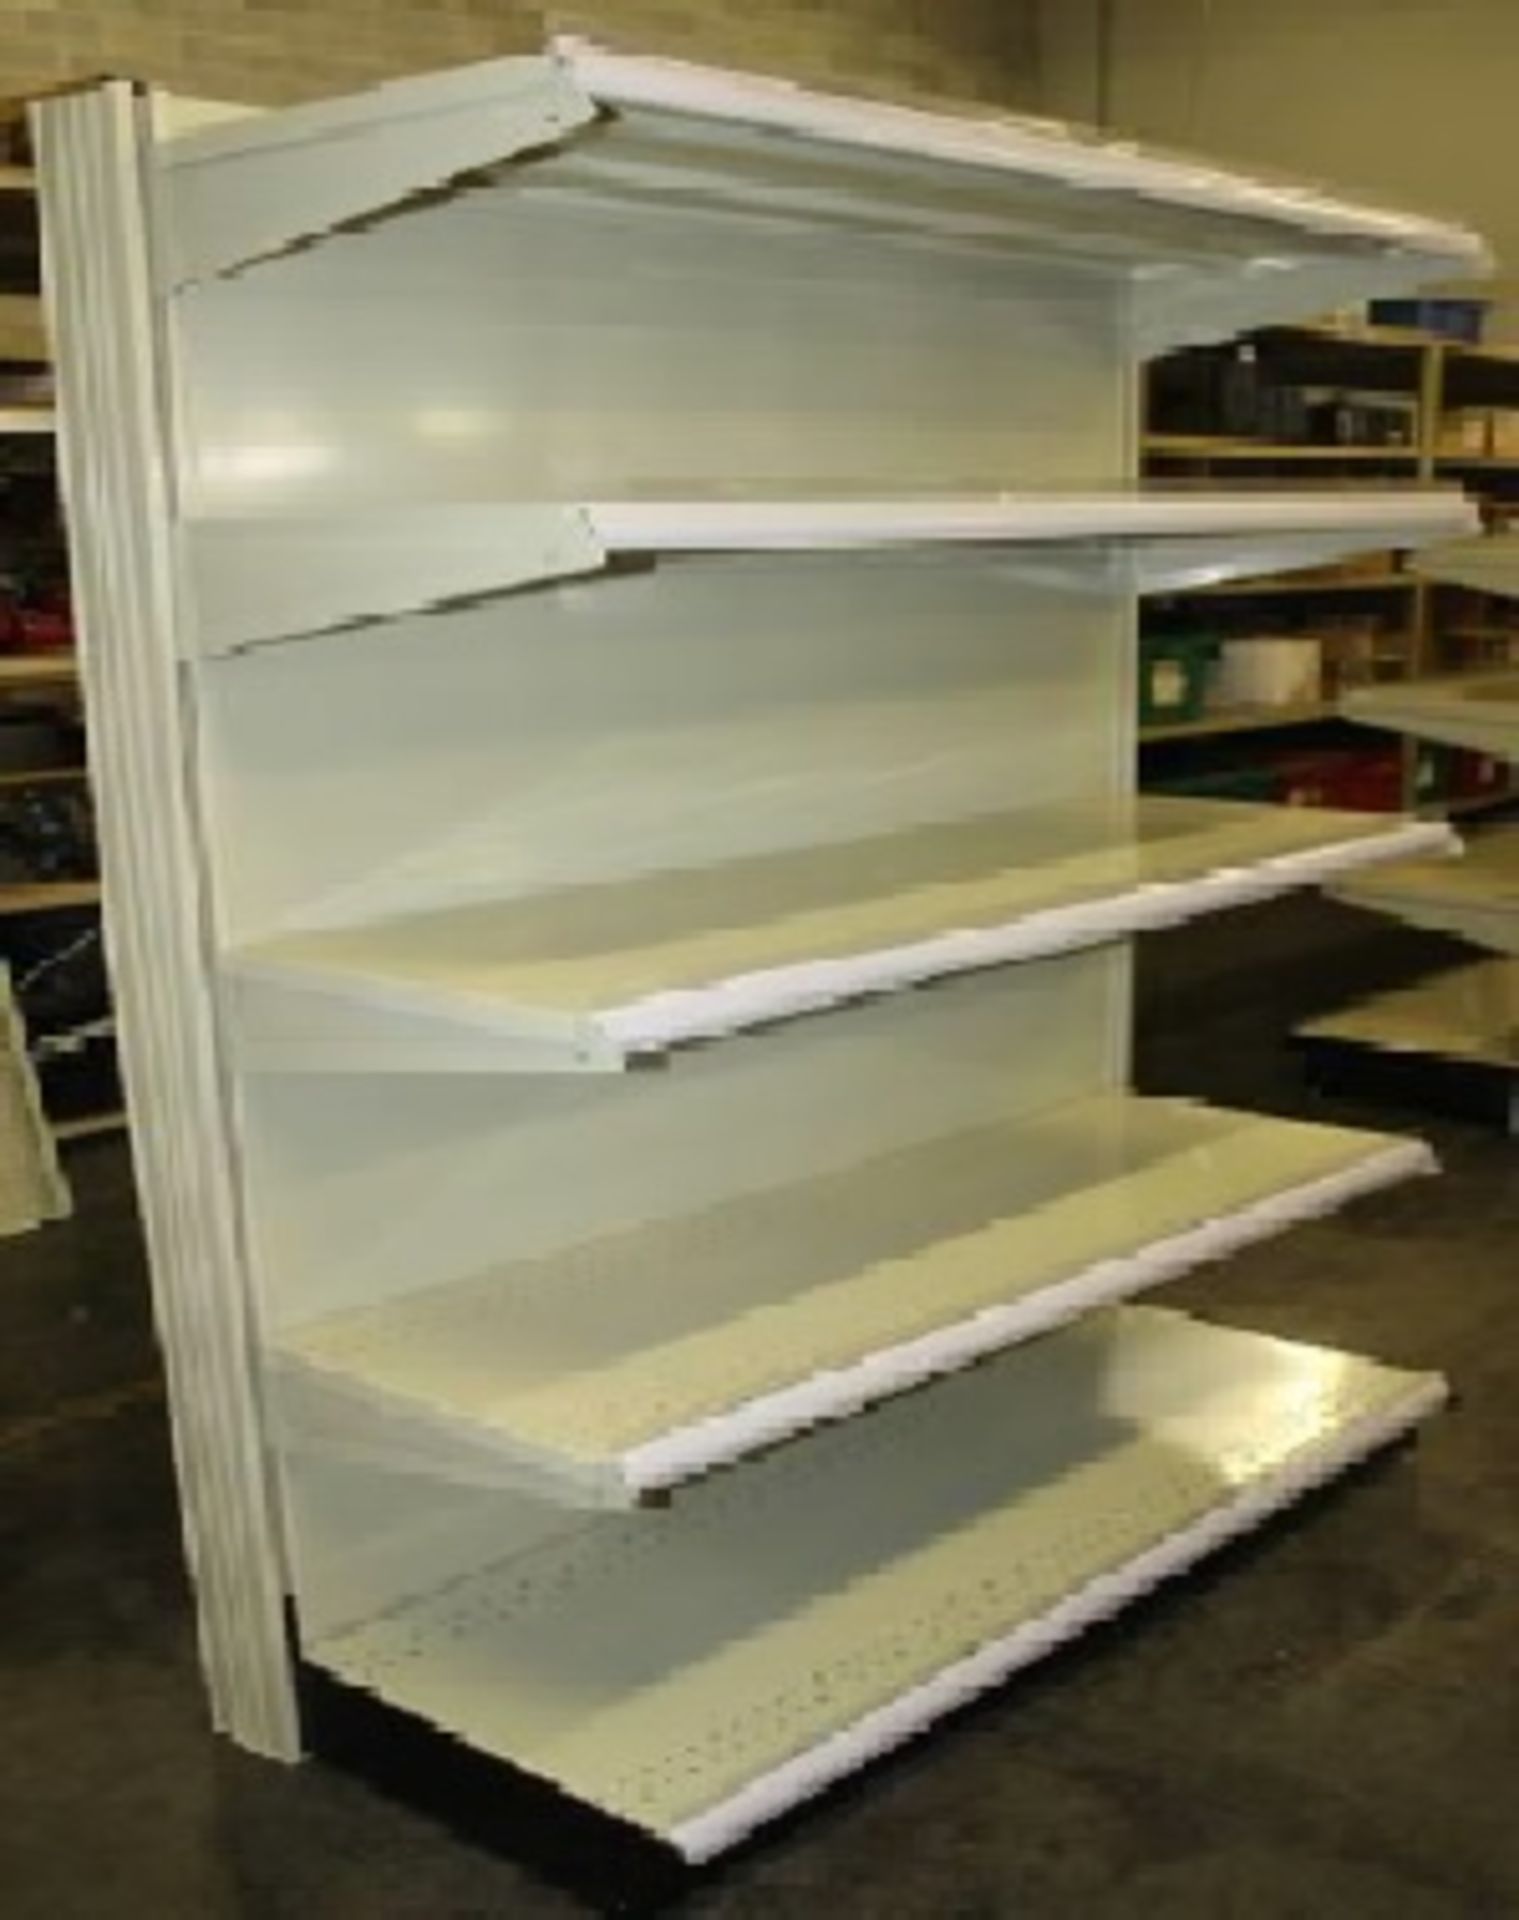 5 SECTIONS OF GONDOLA SHELVING WITH 4 SHELVES LEVEL DOUBLE SIDED - Image 3 of 3